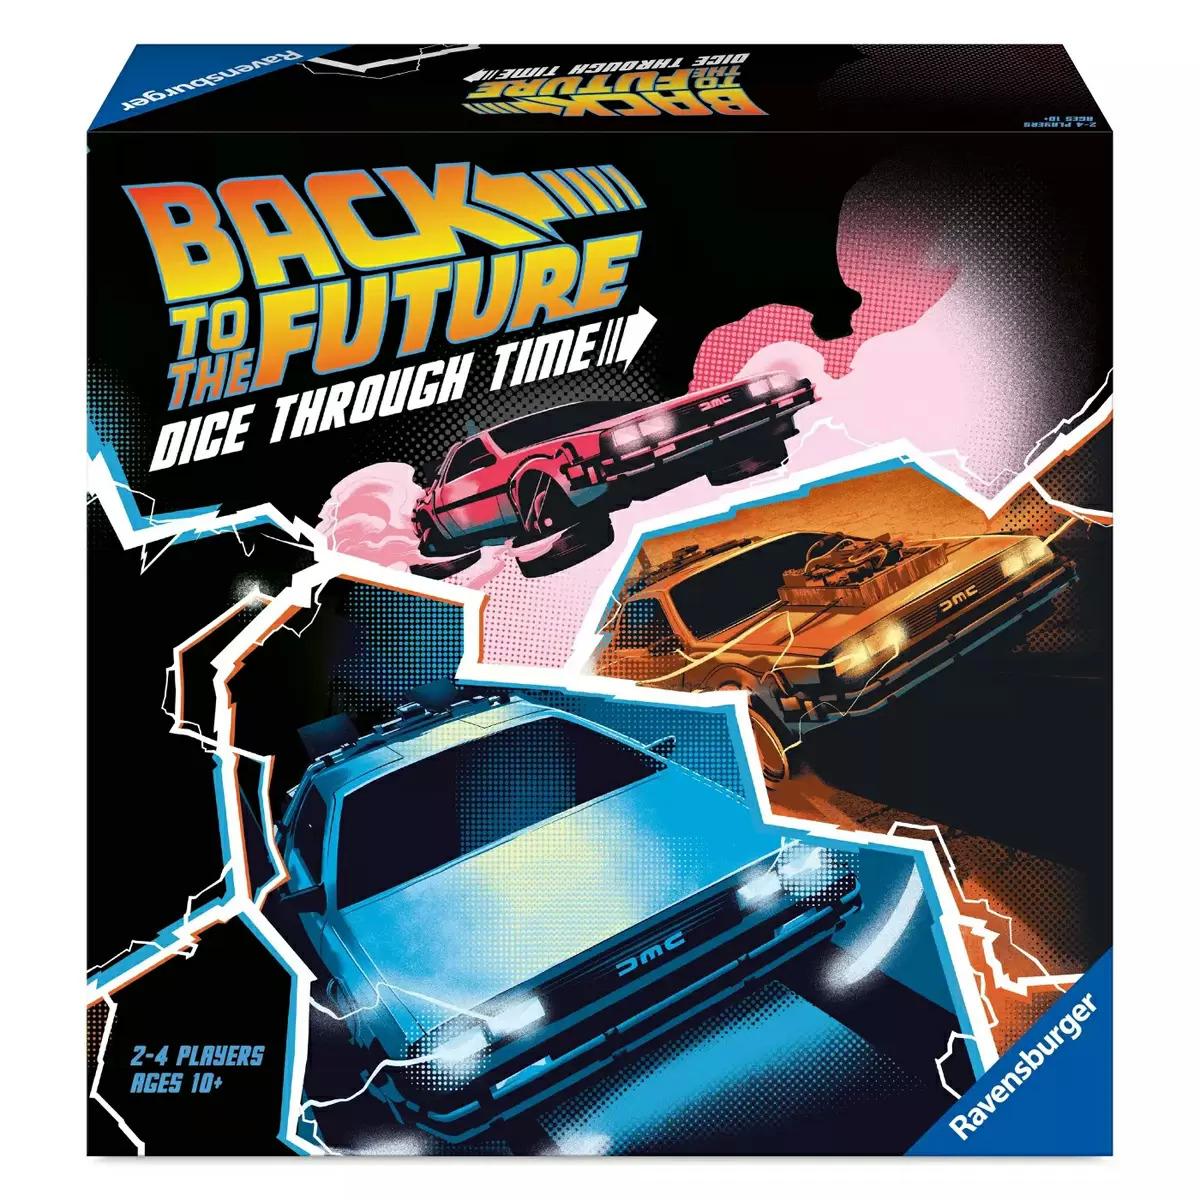 Back to the Future Dice Through Time Board Game for $14.99